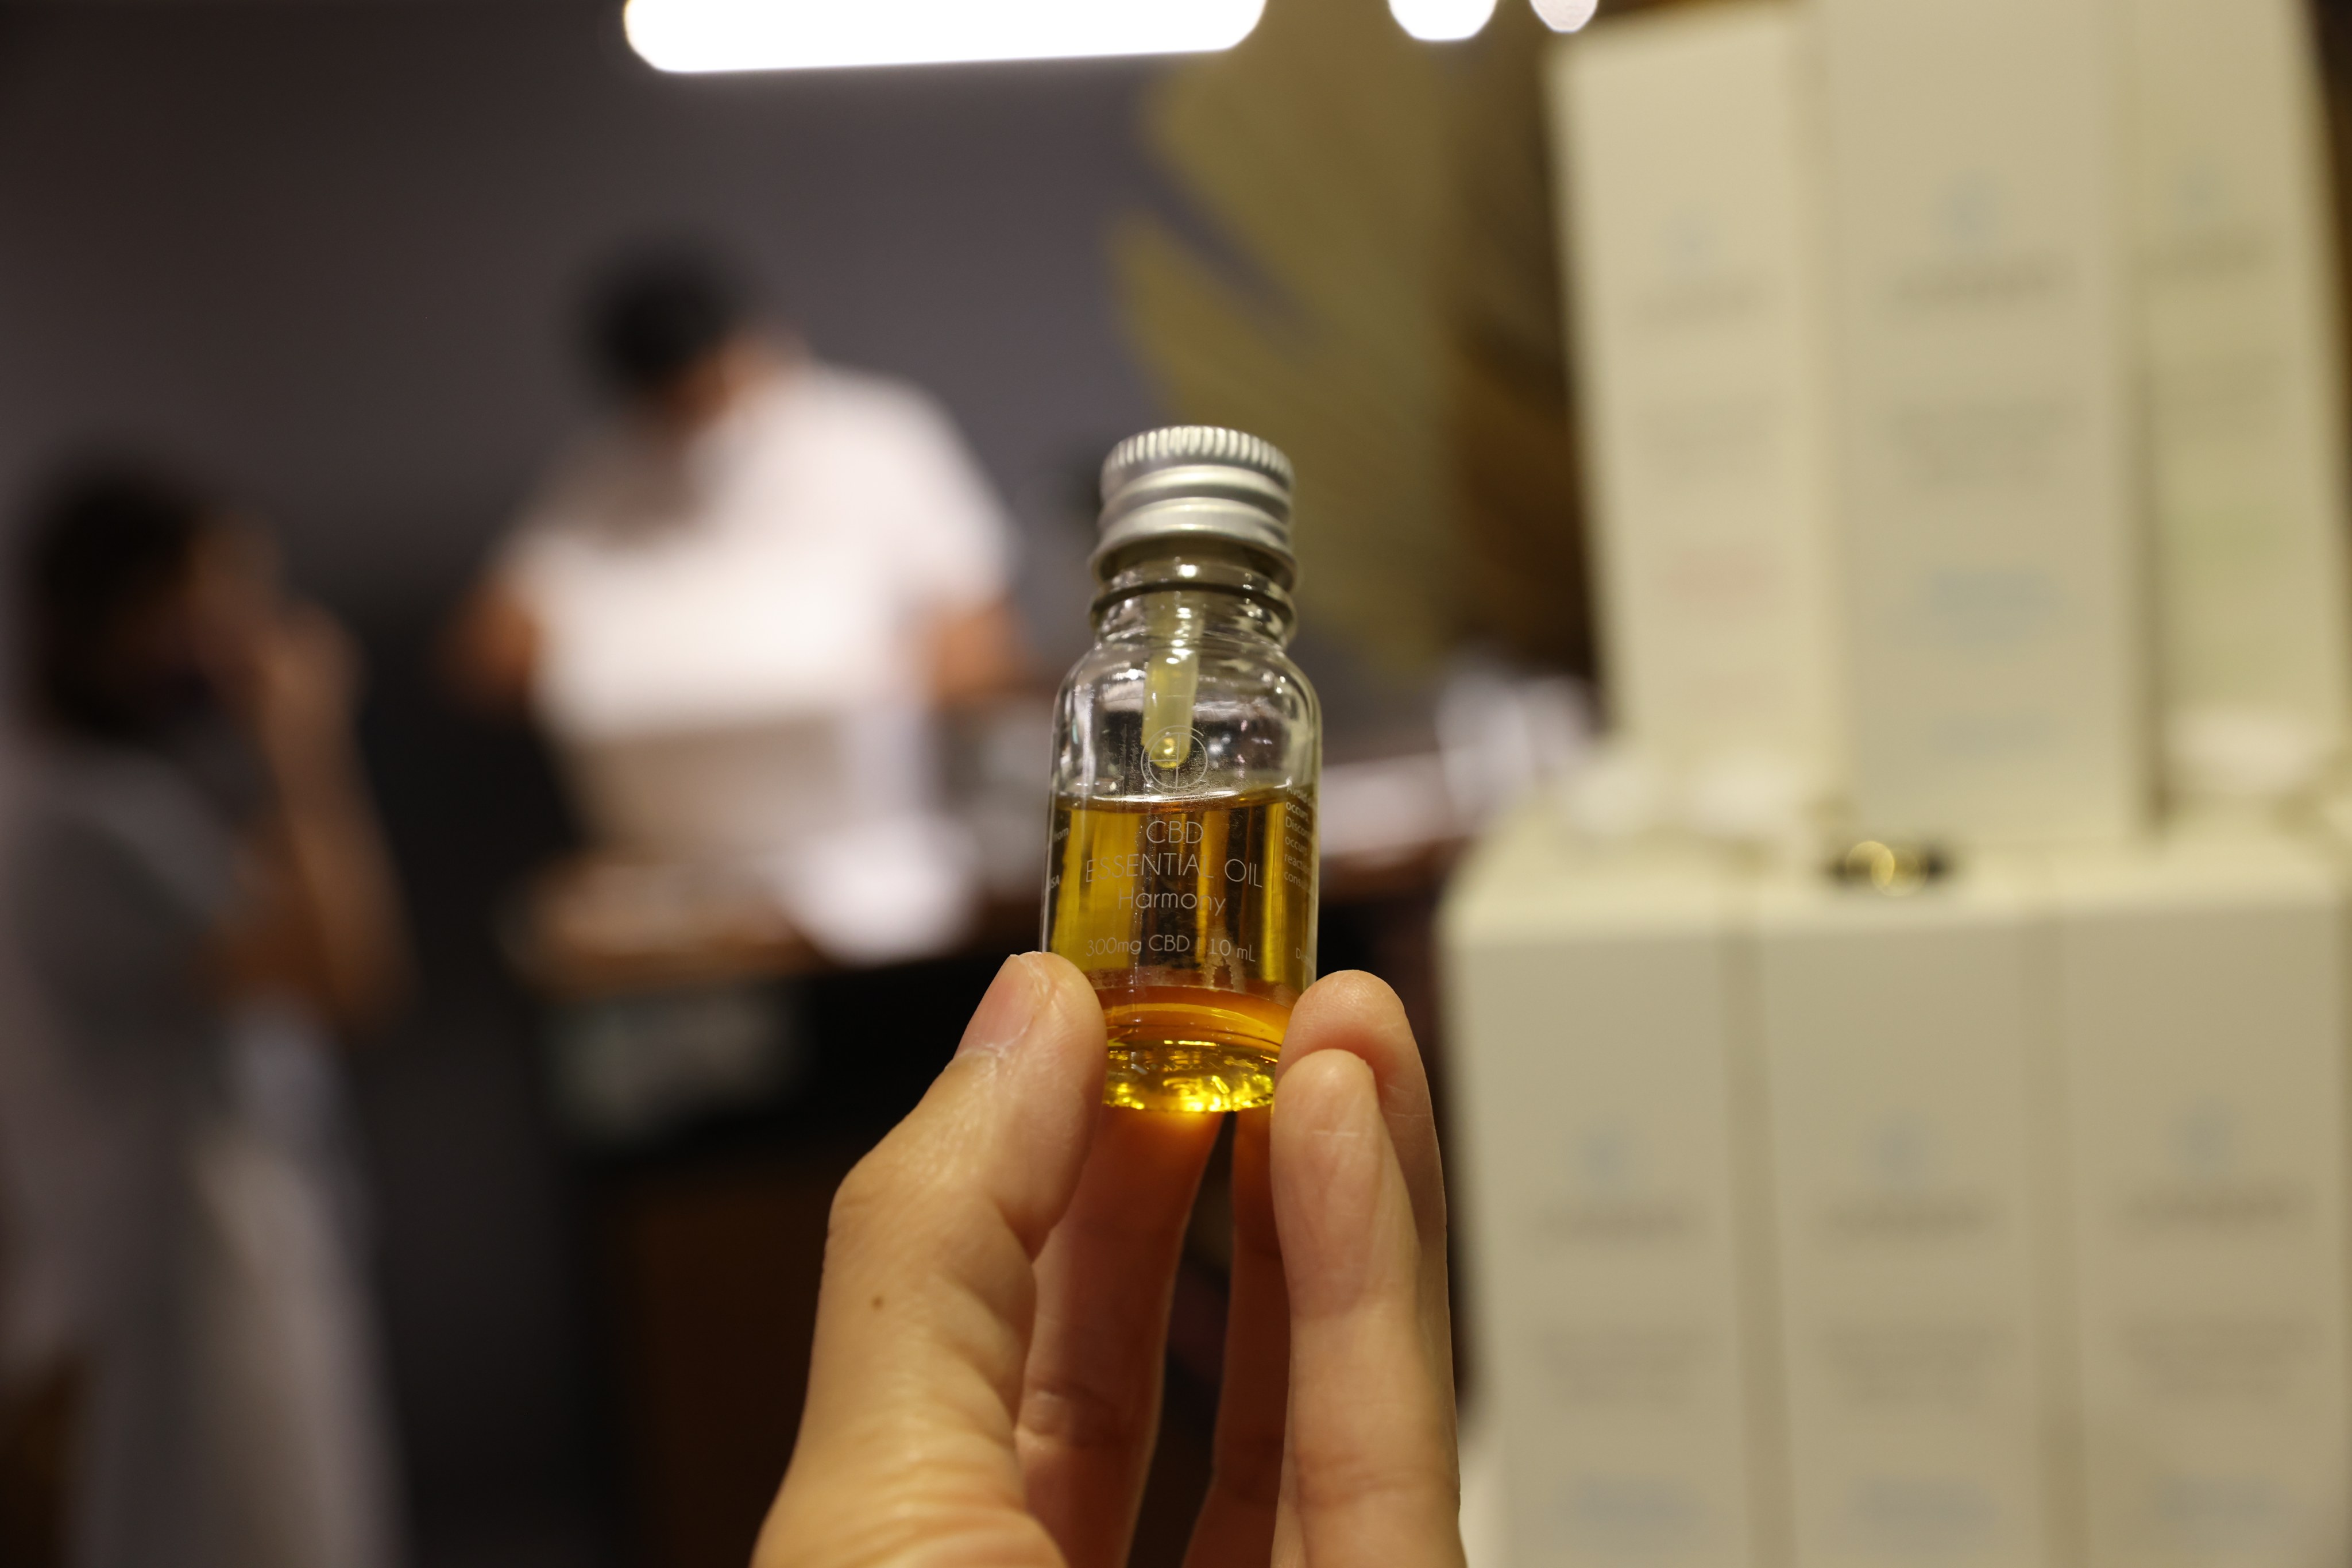 More than 1,000 CBD products have been seized since the city-wide ban came into effect. Photo: Nora Tam